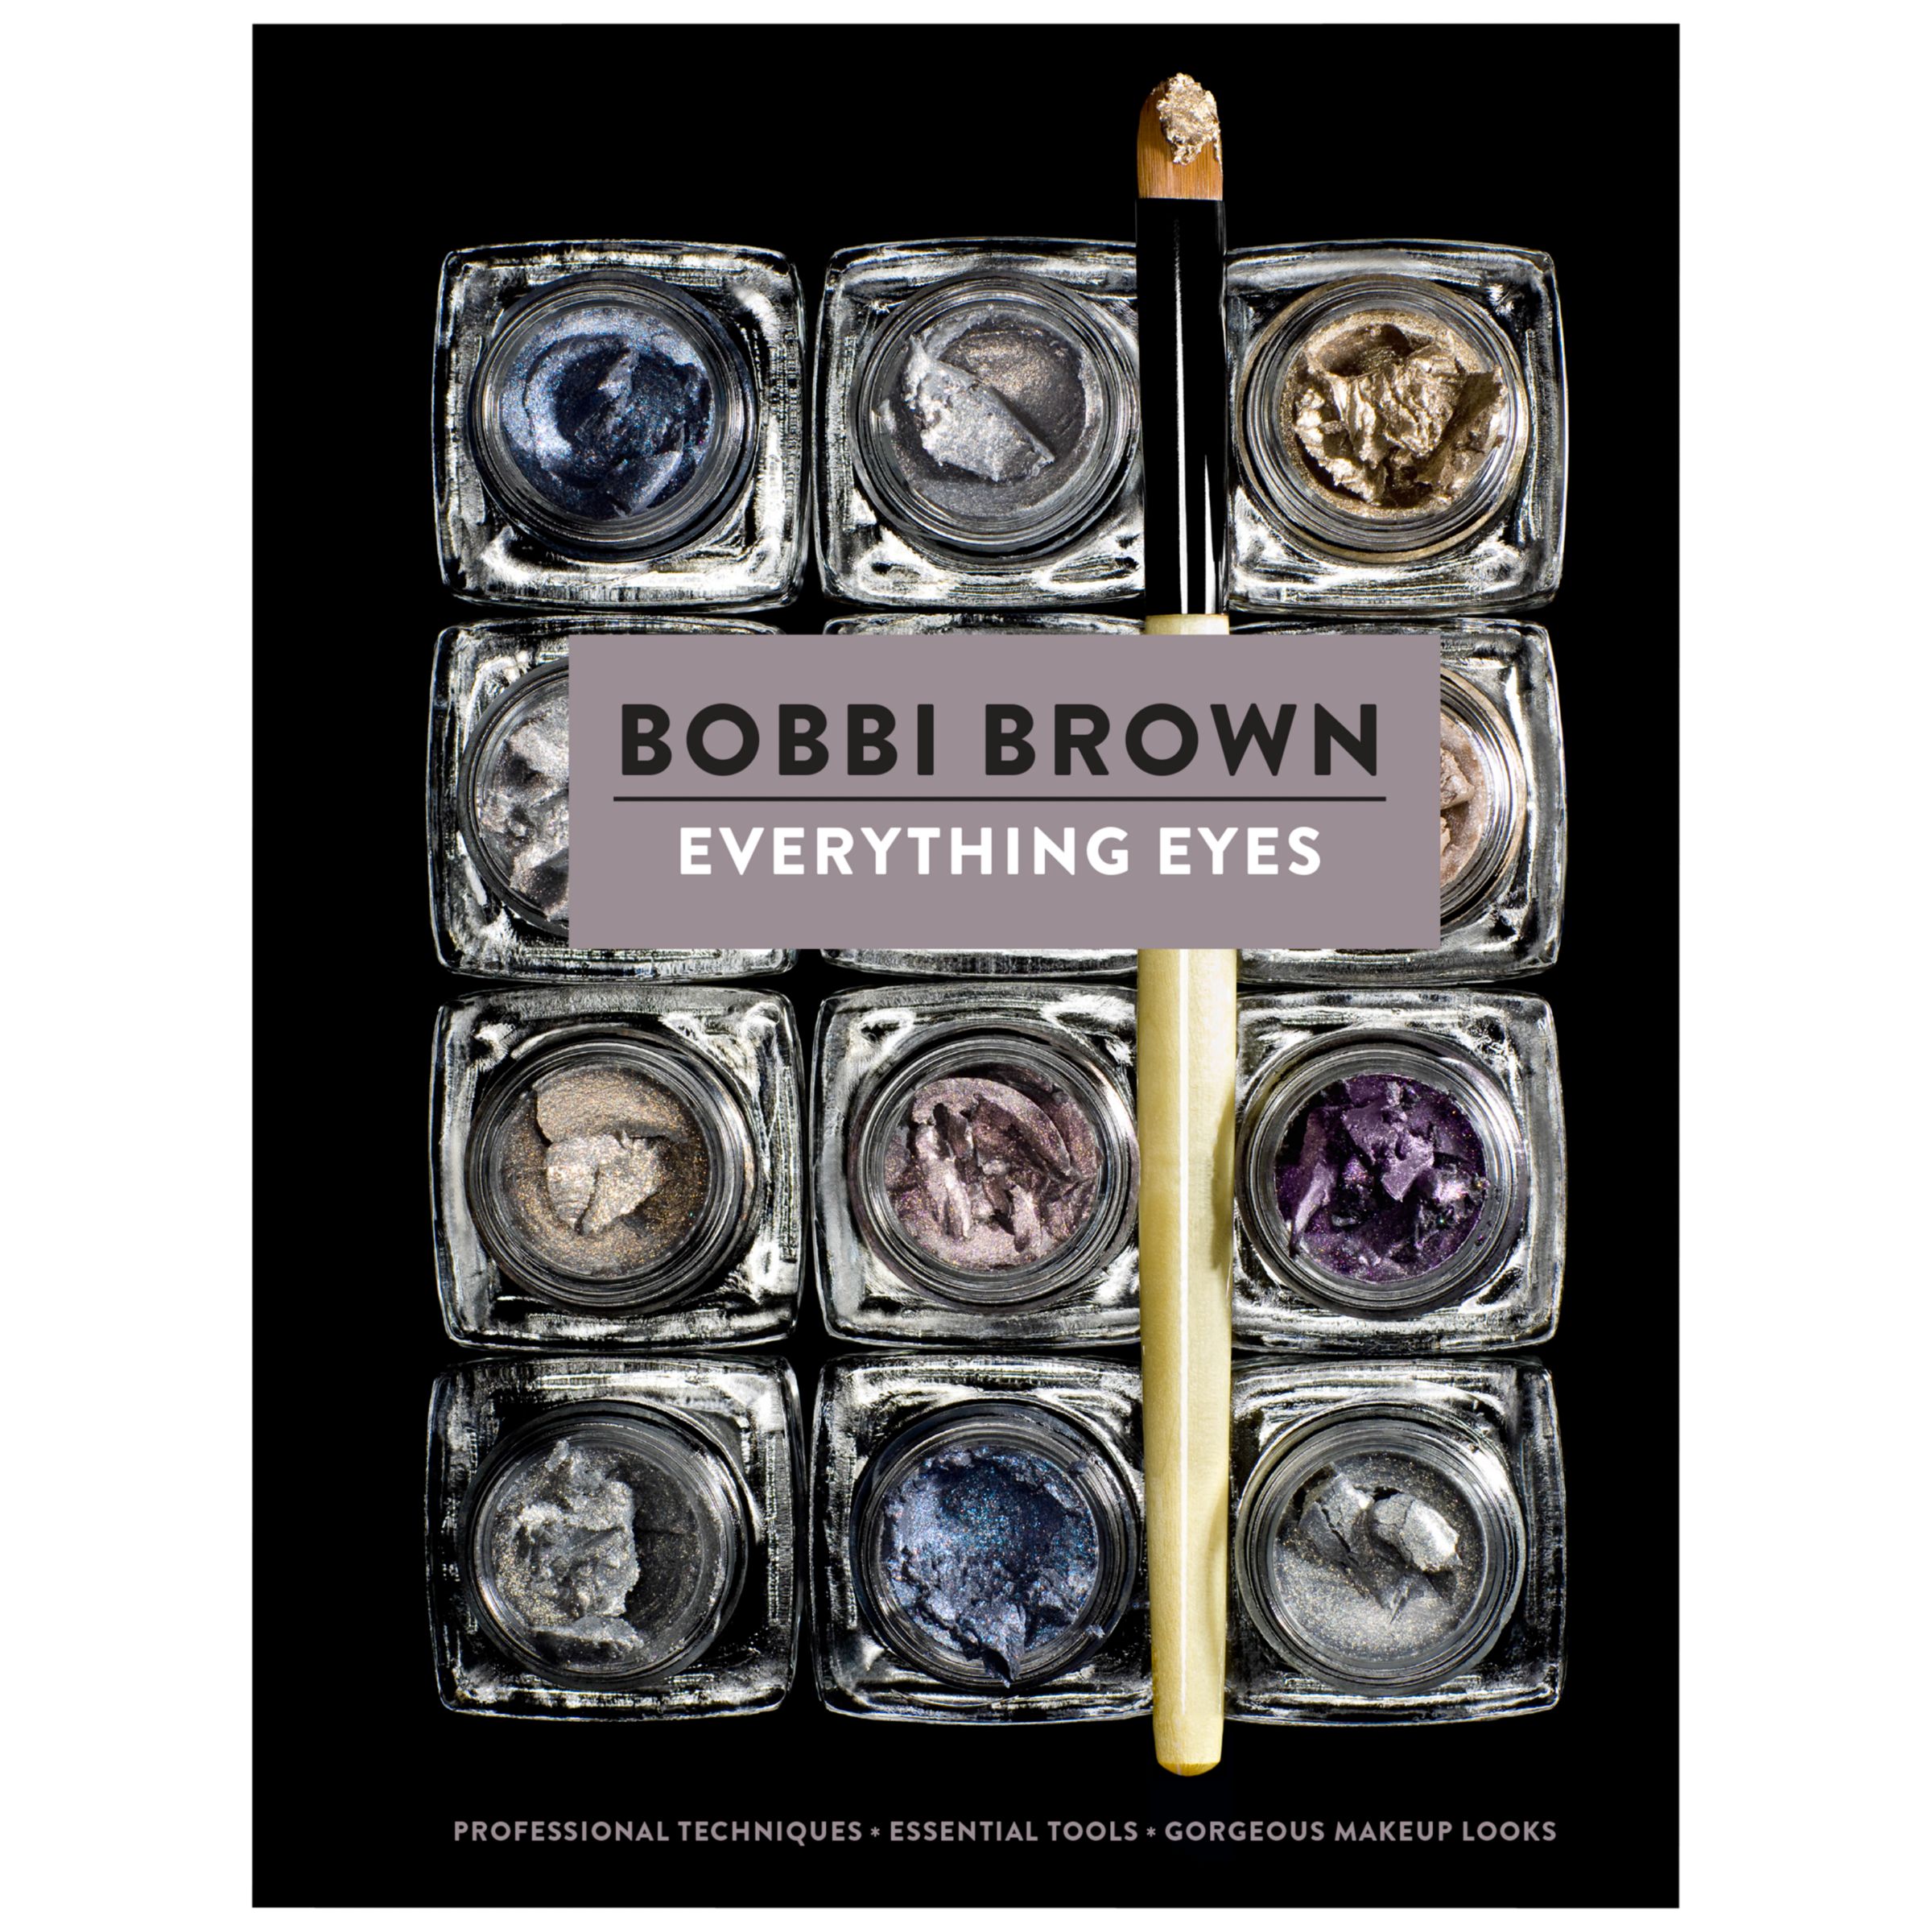 Bobbi Brown All About Eyes Book